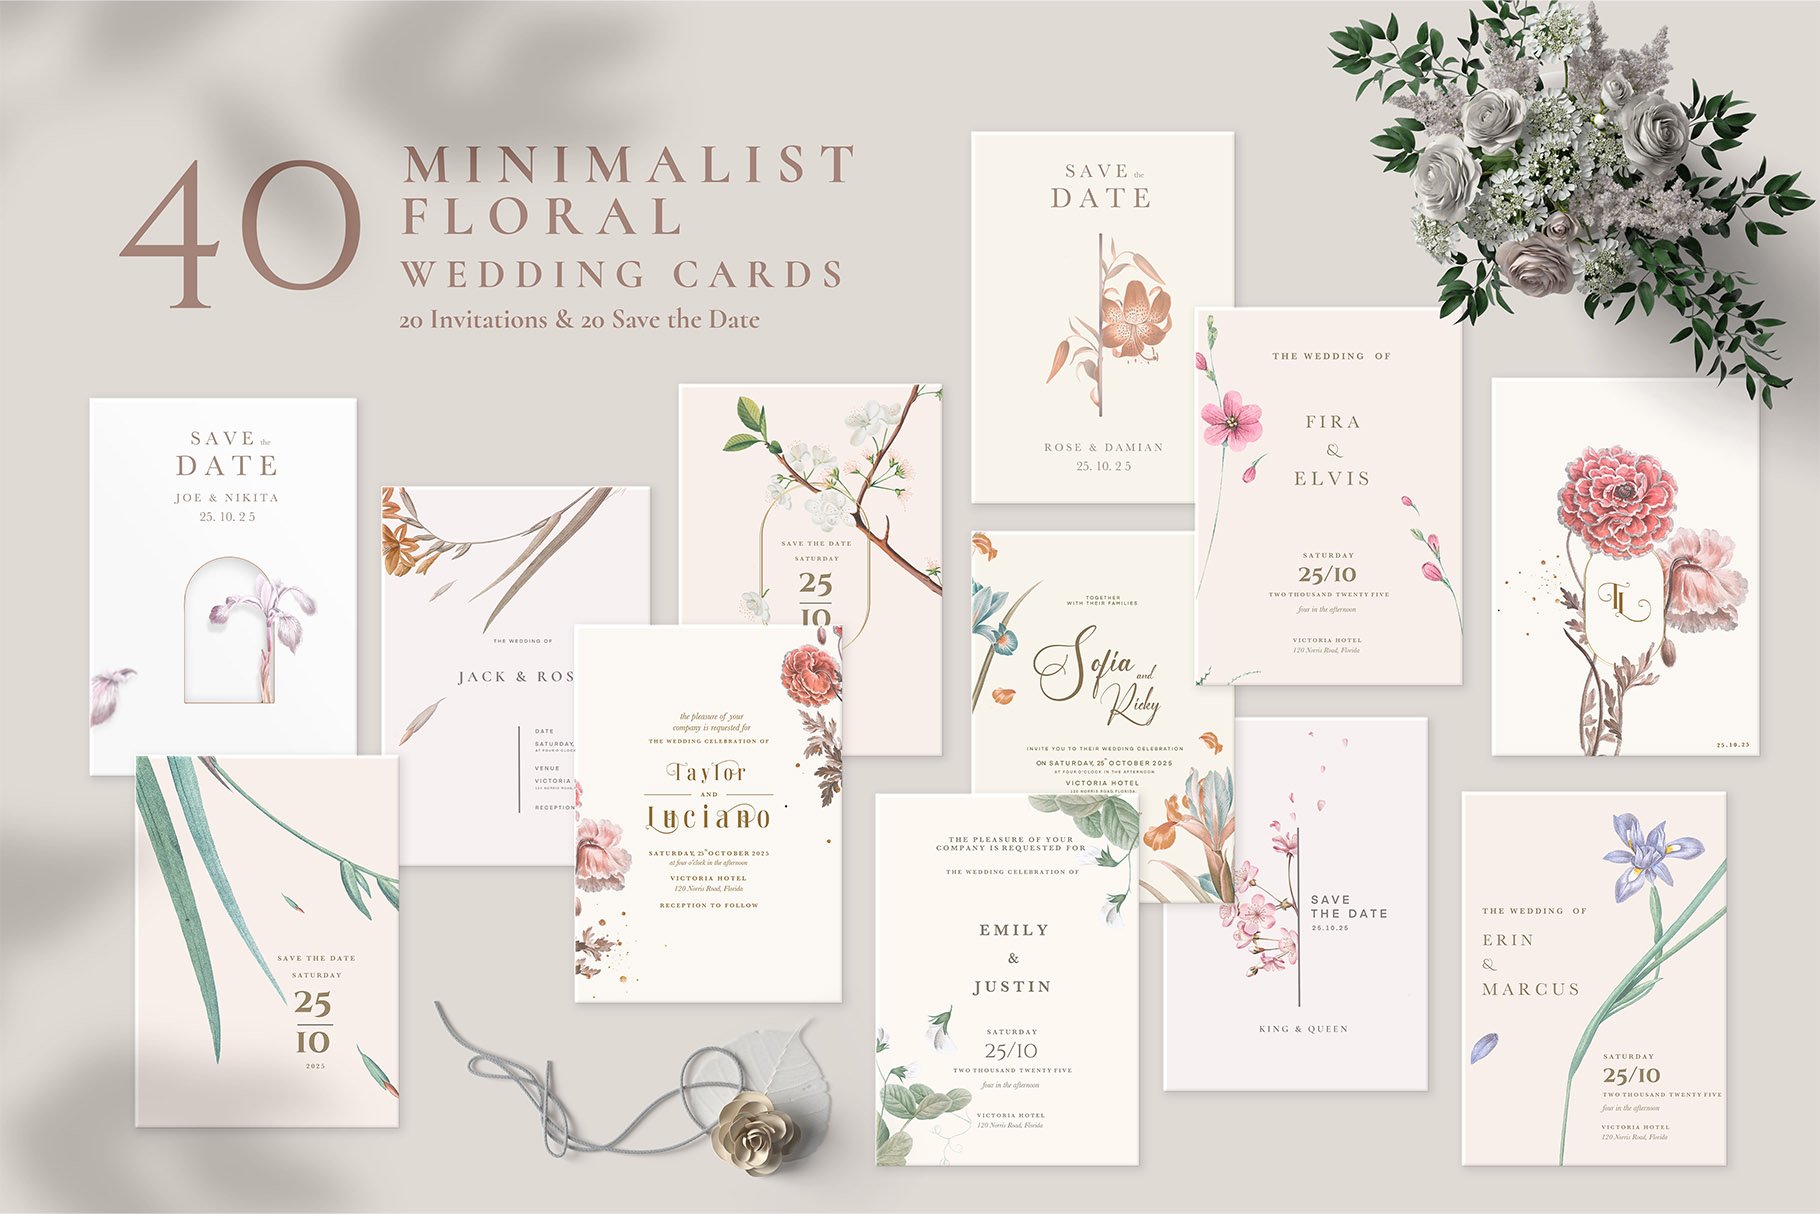 40 Minimalist Floral Wedding Cards cover image.